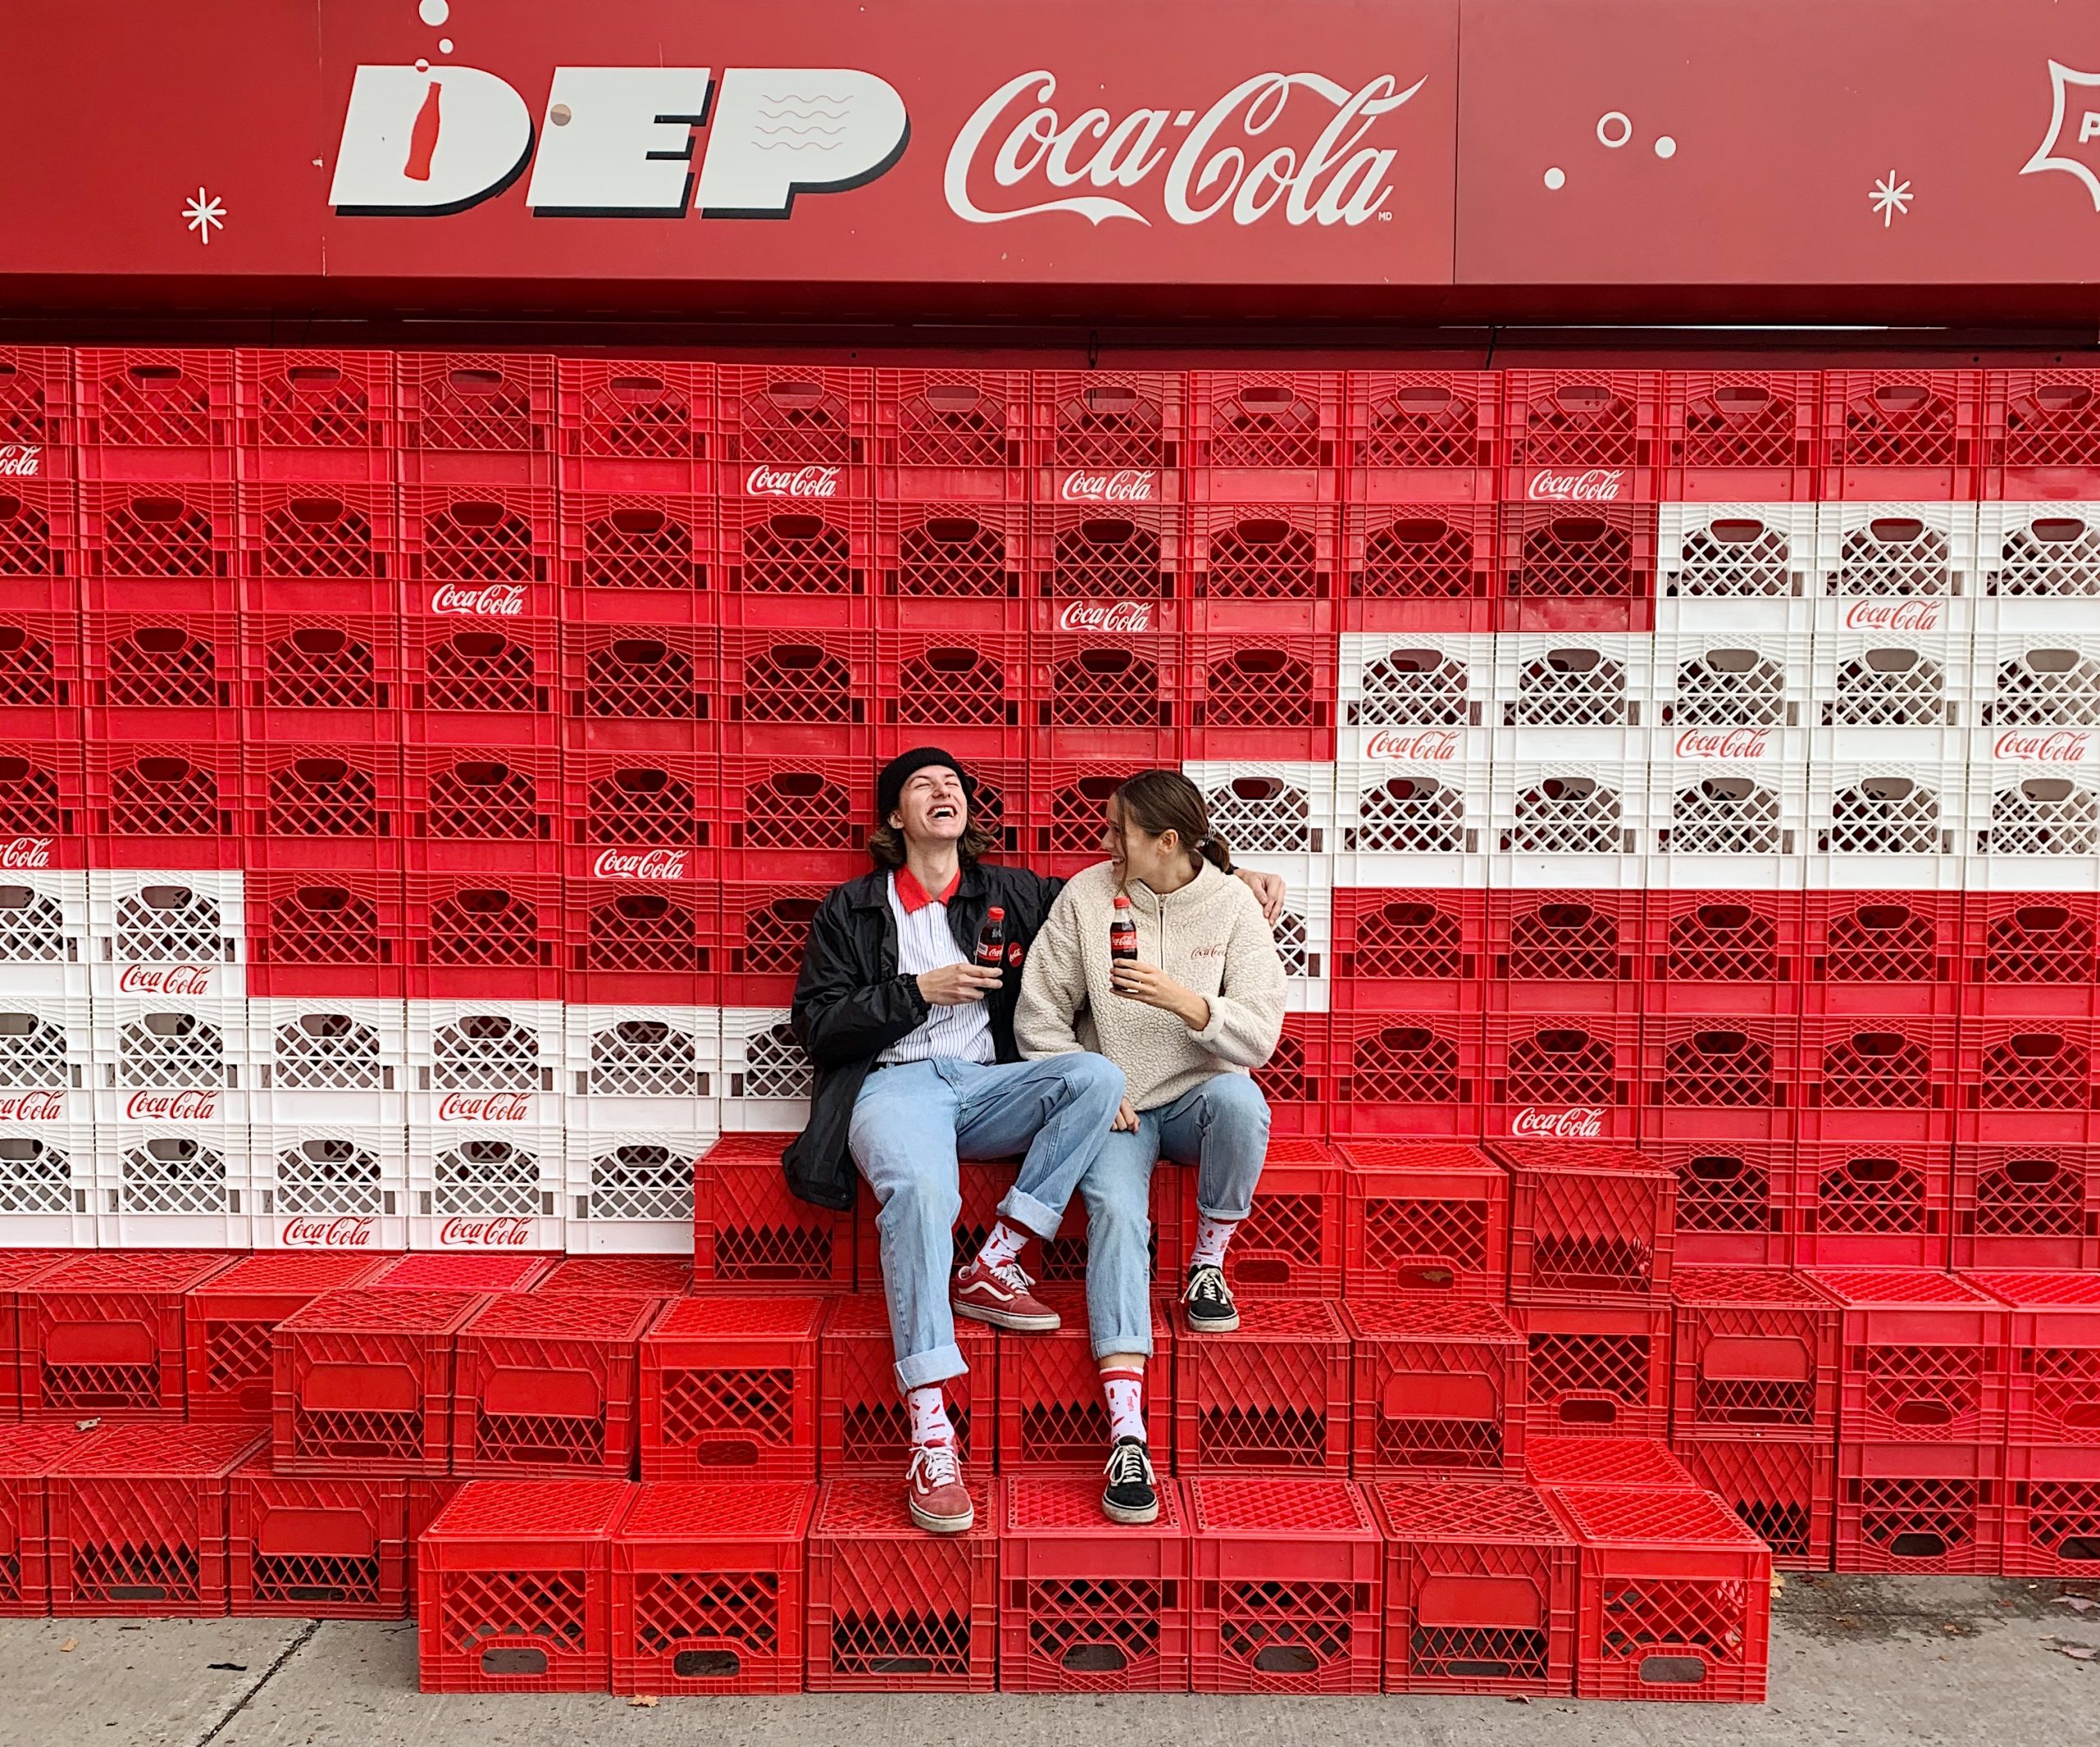 Two people sitting on milk crates under a Coca Cola sign